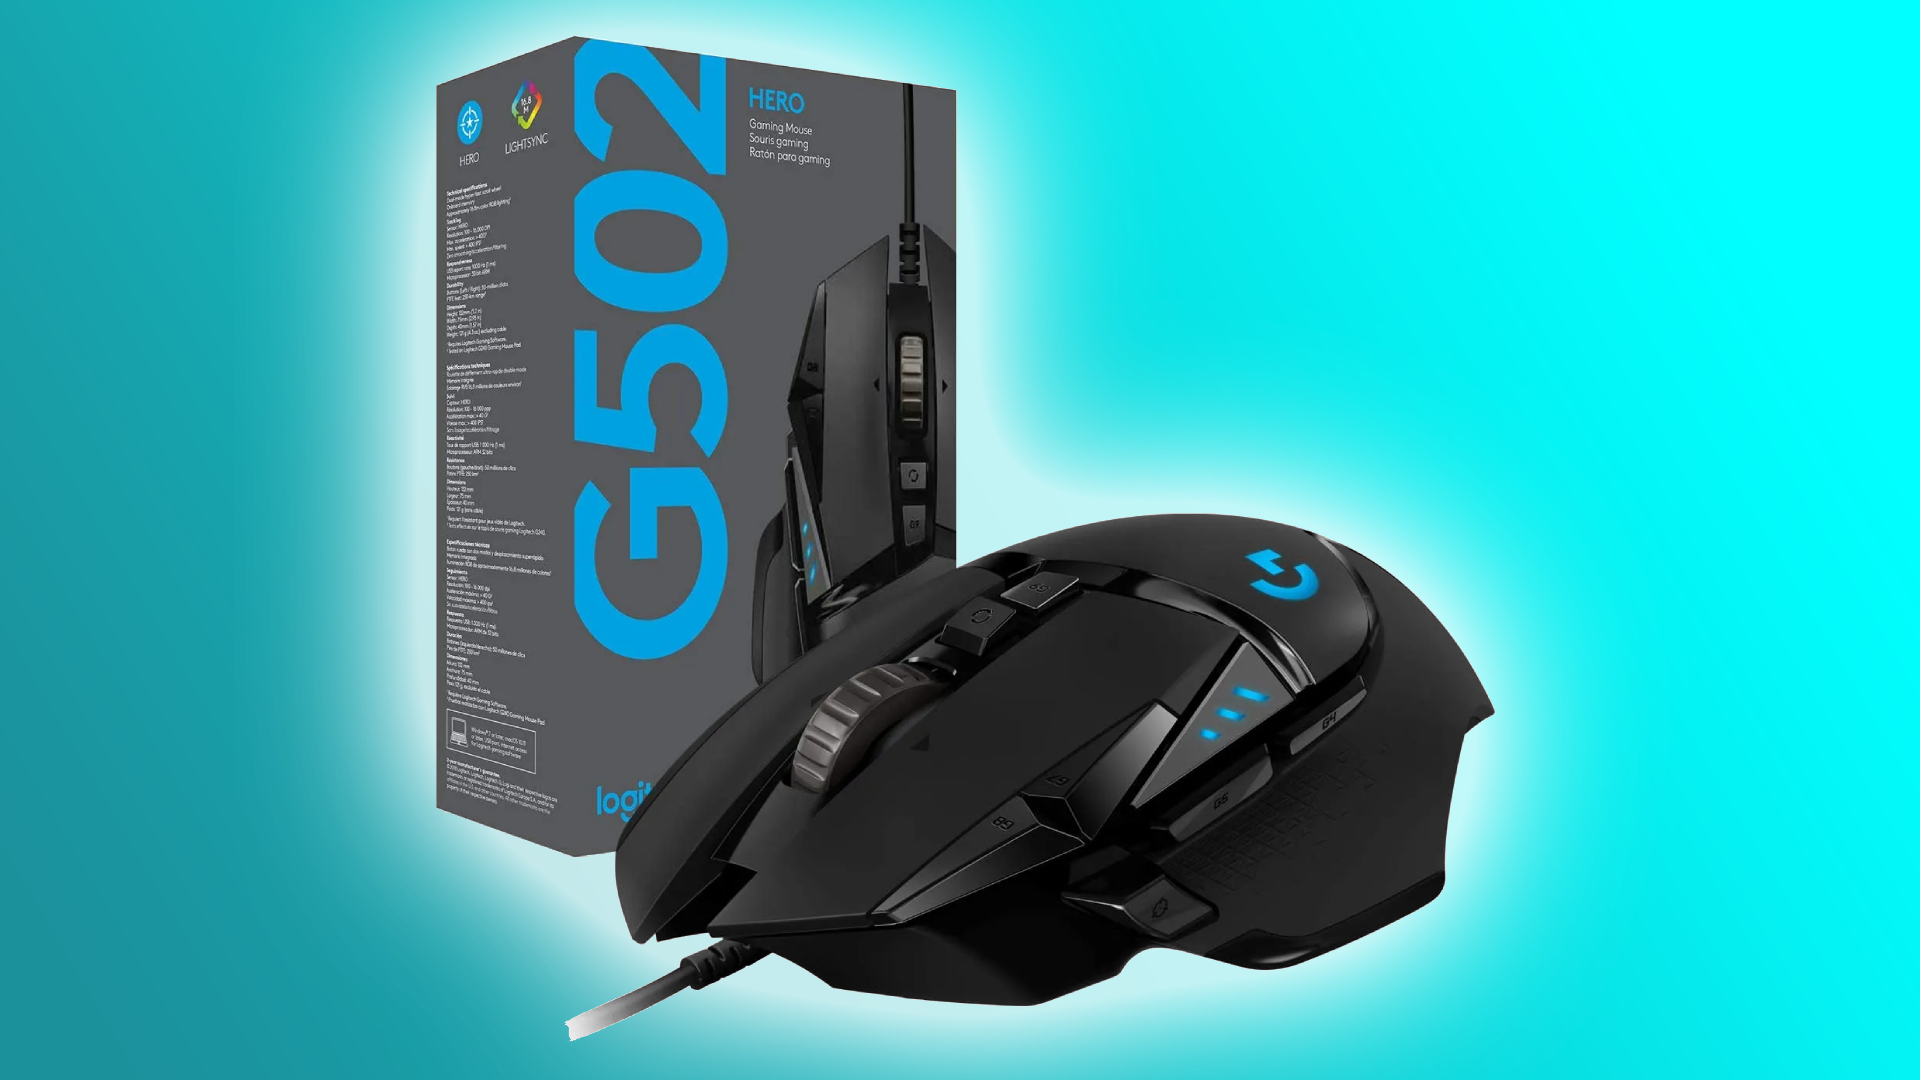 Grab the Logitech G502 Hero gaming mouse for half price